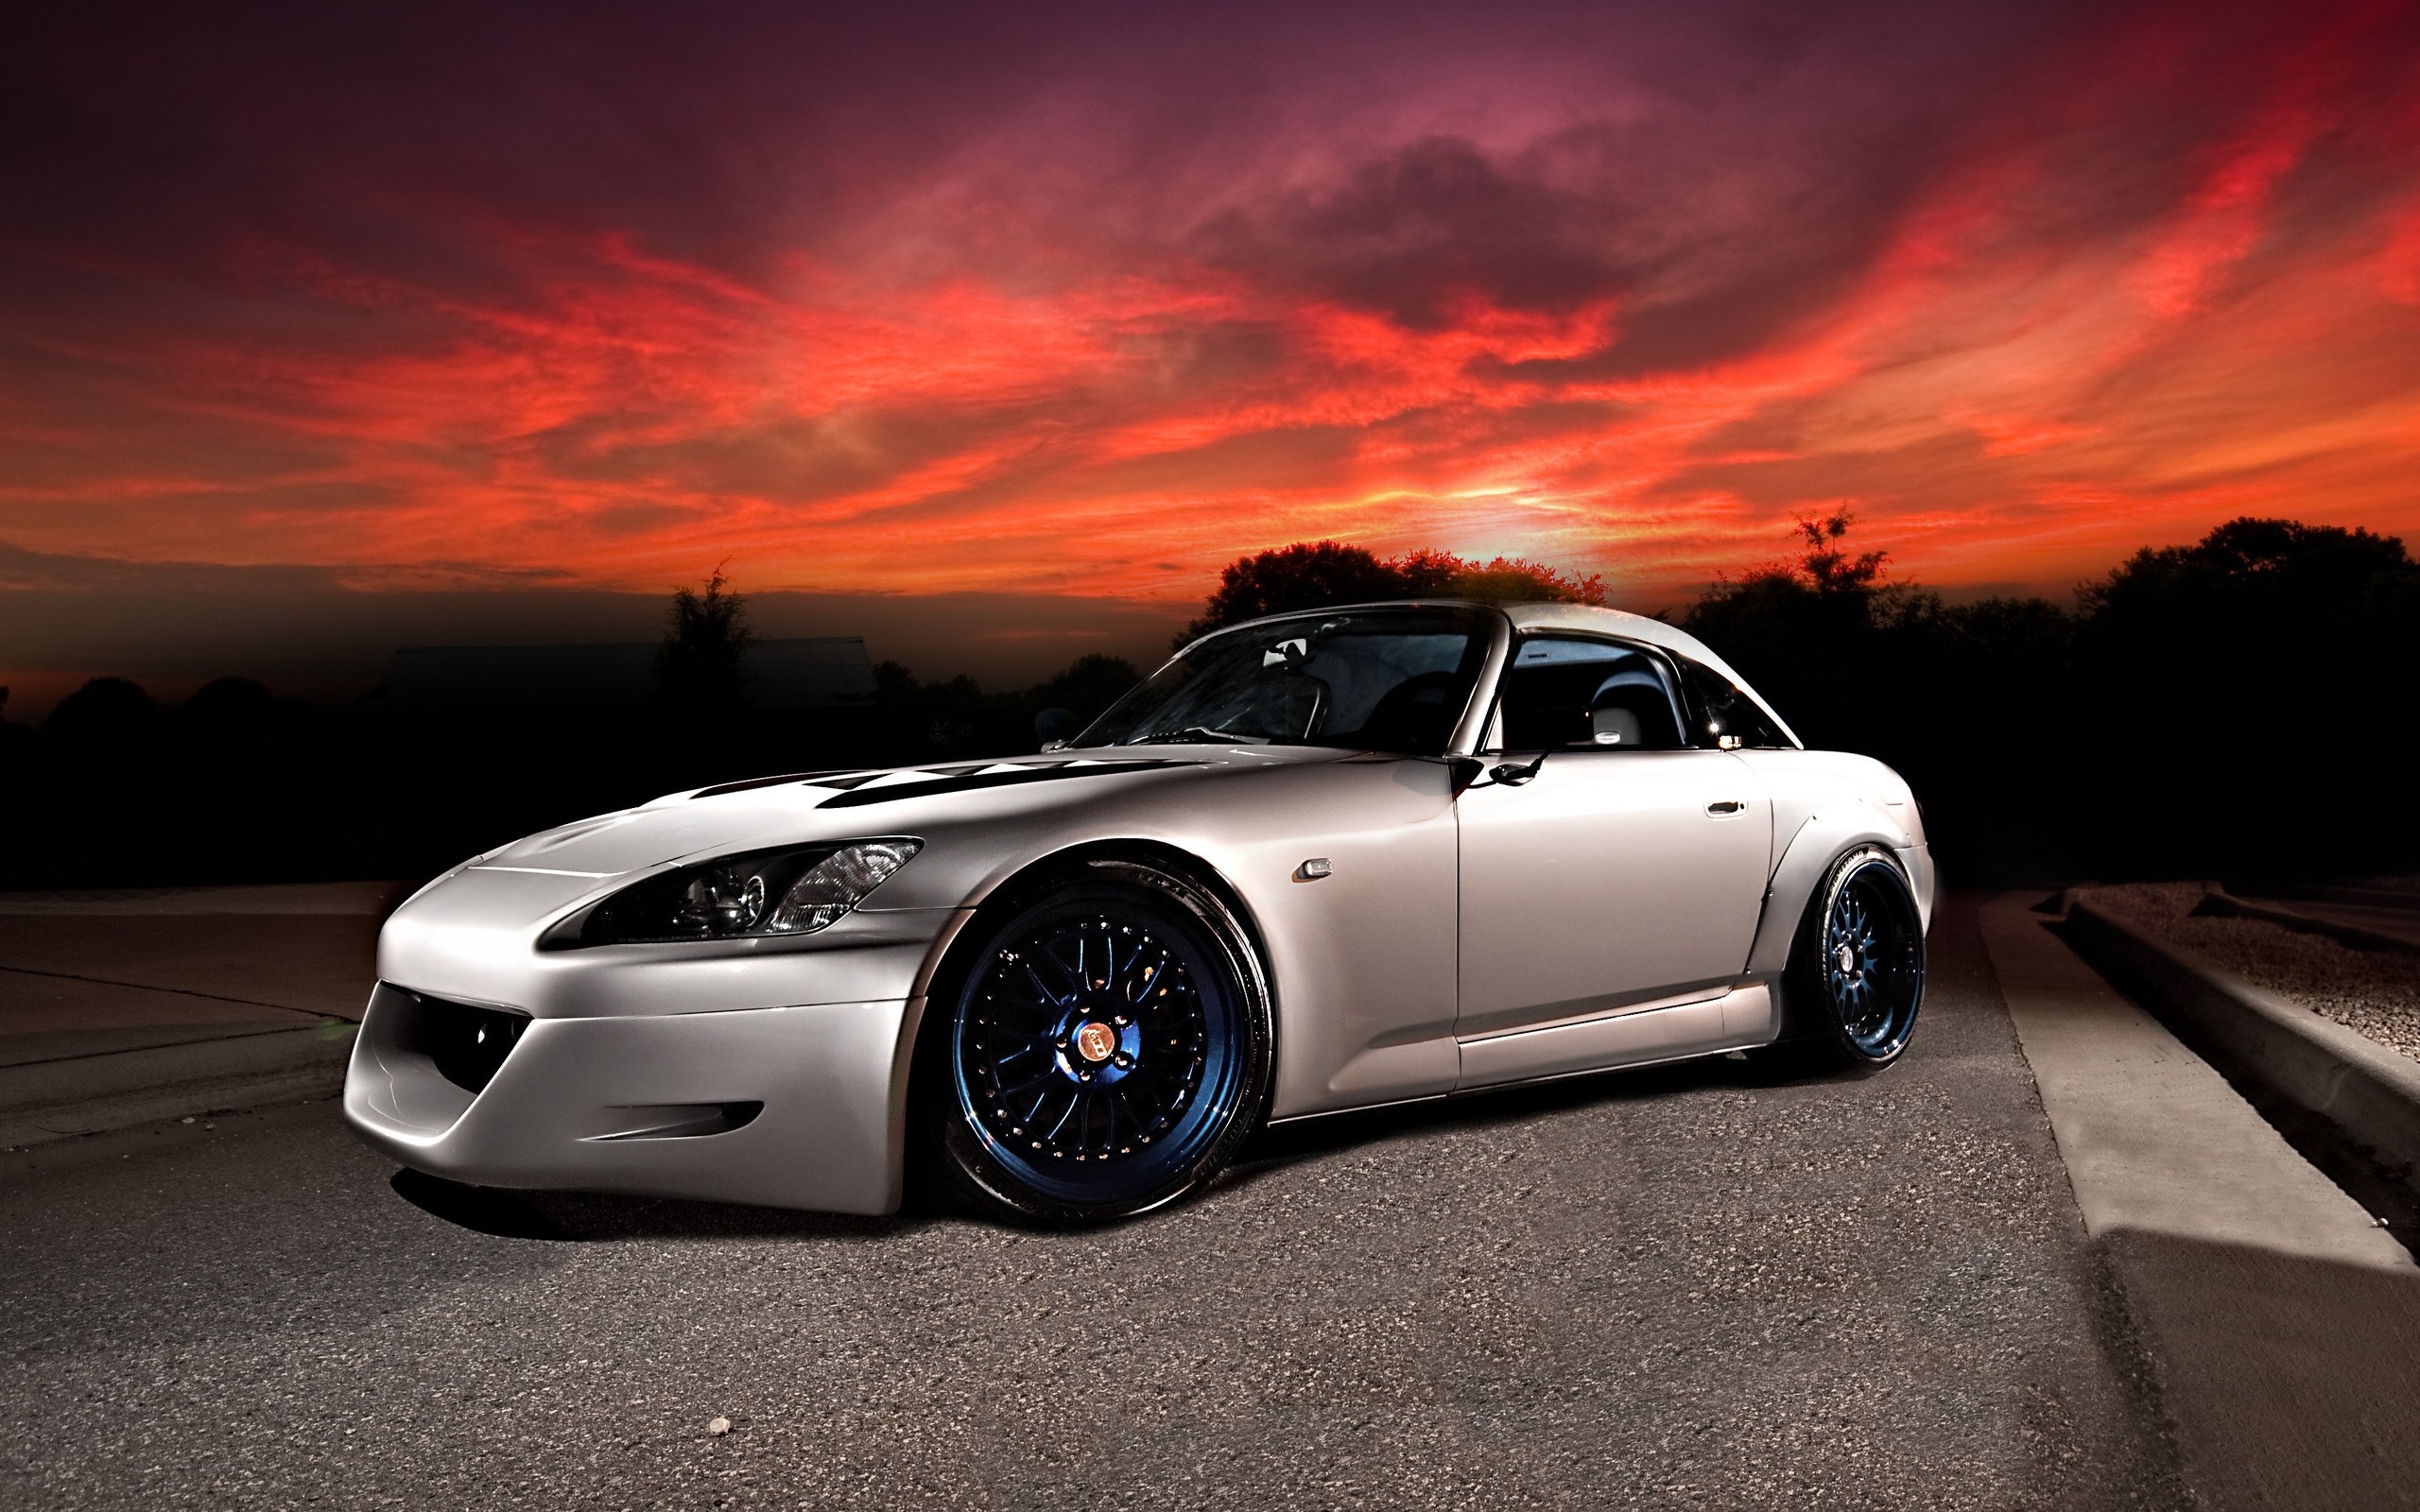 White Honda S2000 Wallpaper And Image Pictures Photos